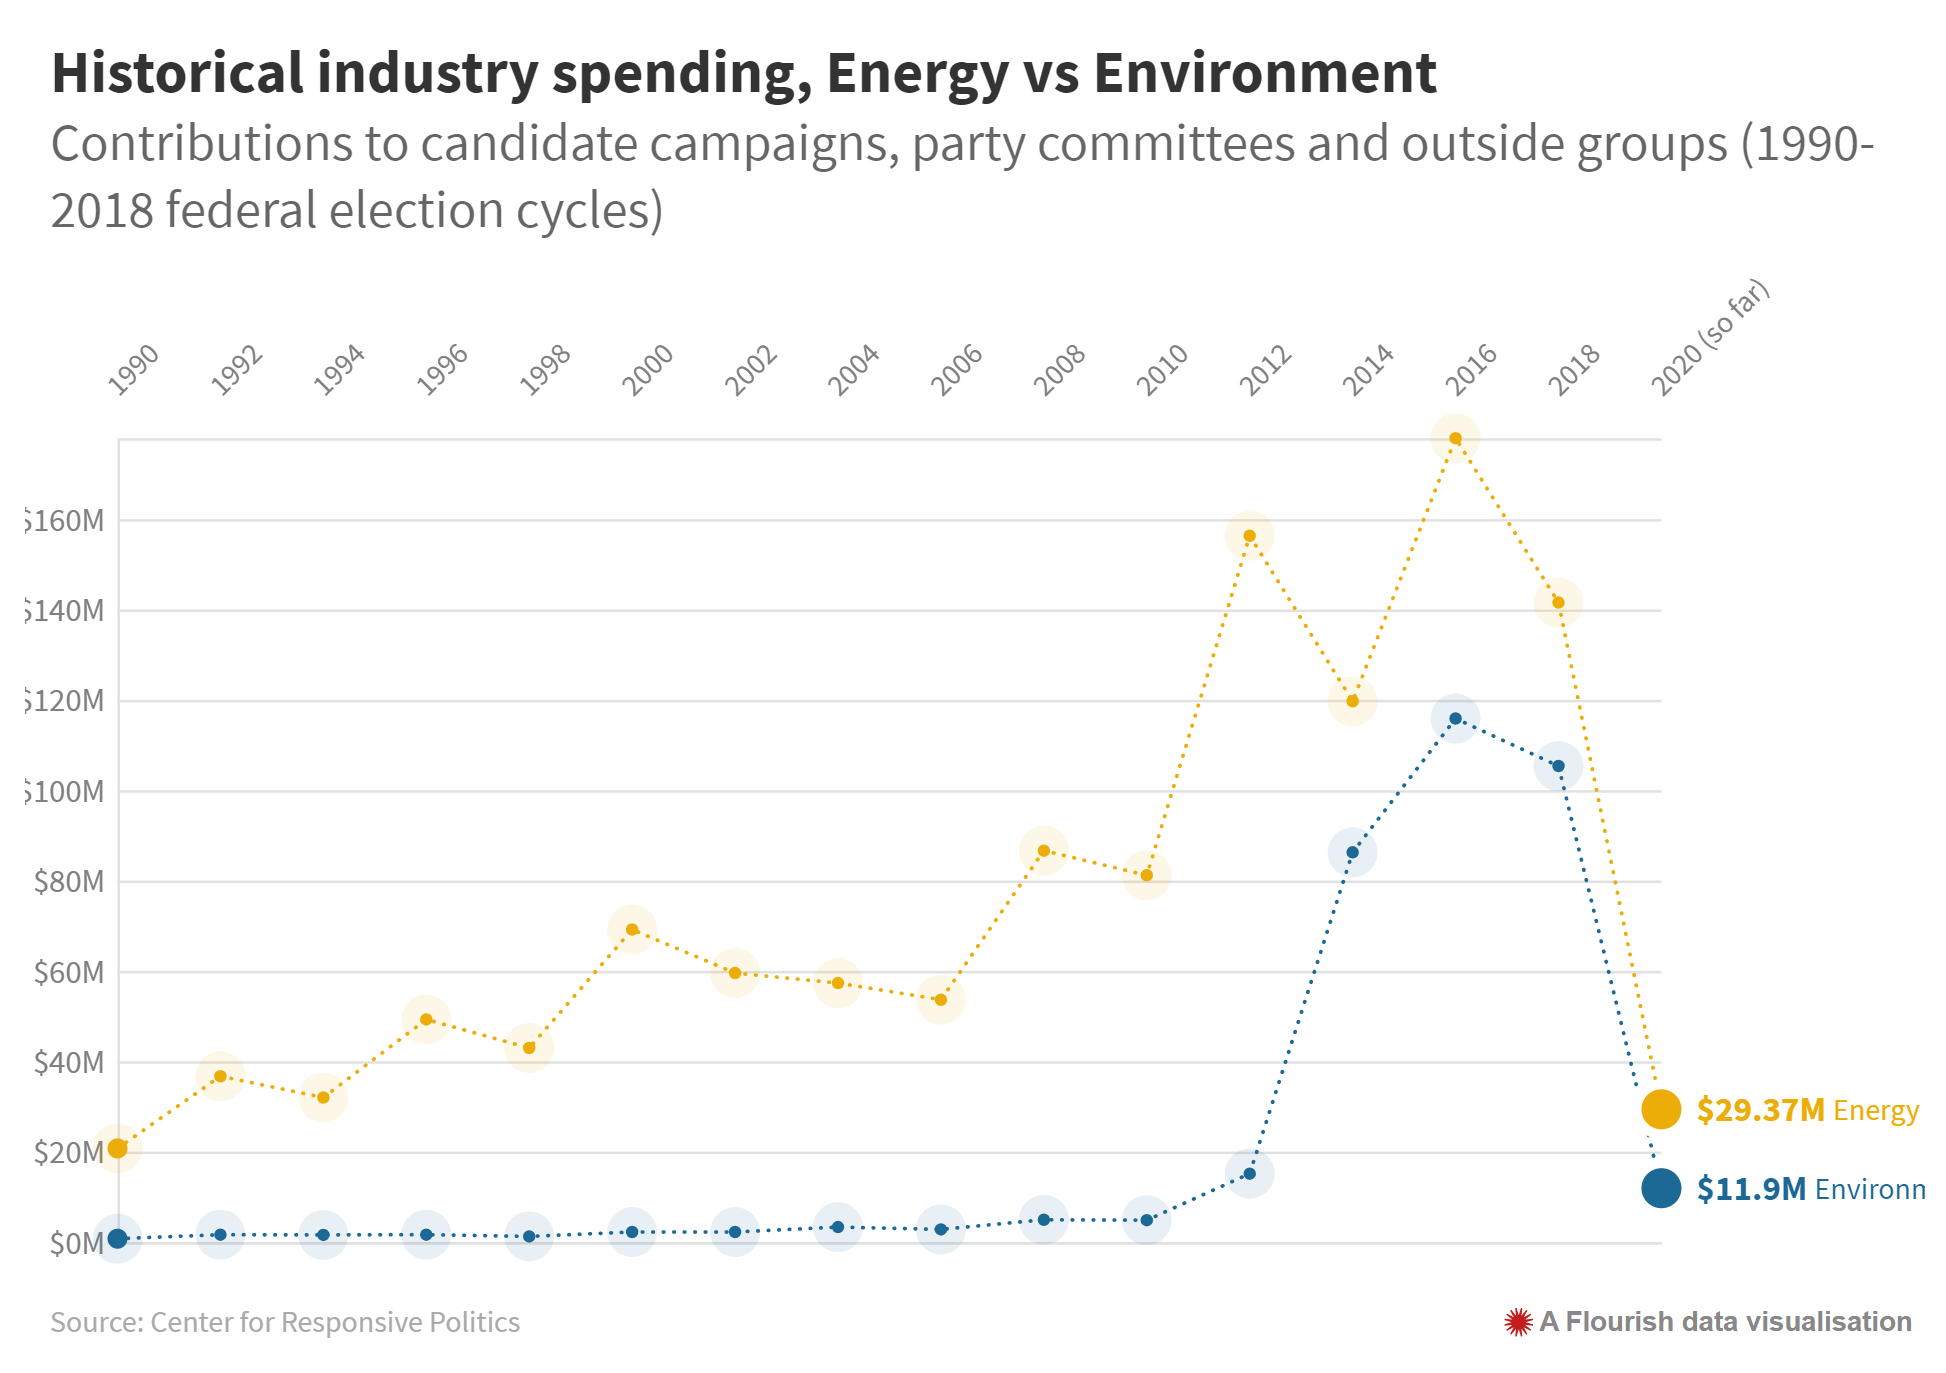 Historical U.S. election industry spending, Energy vs. Environment, 1990-2019, showing contributions to candidate campaigns, party committees, and outside groups (1990-2018 federal election cycles). Graphic: Center for Responsive Politics